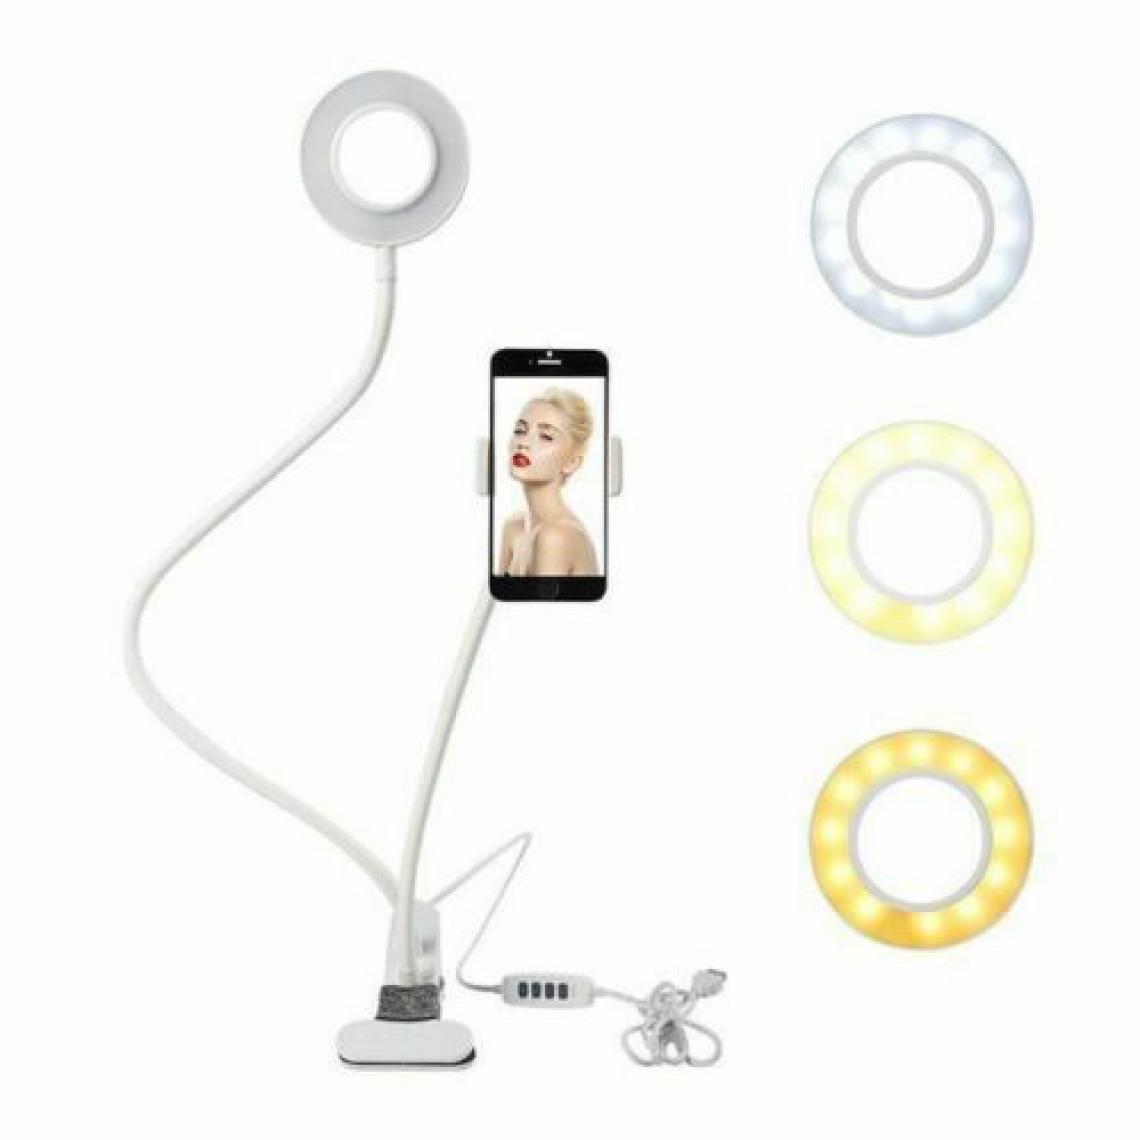 Ozzzo - Stand support bureau selfie led ozzzo blanc pour Huawei Honor 8x Max - Station d'accueil smartphone